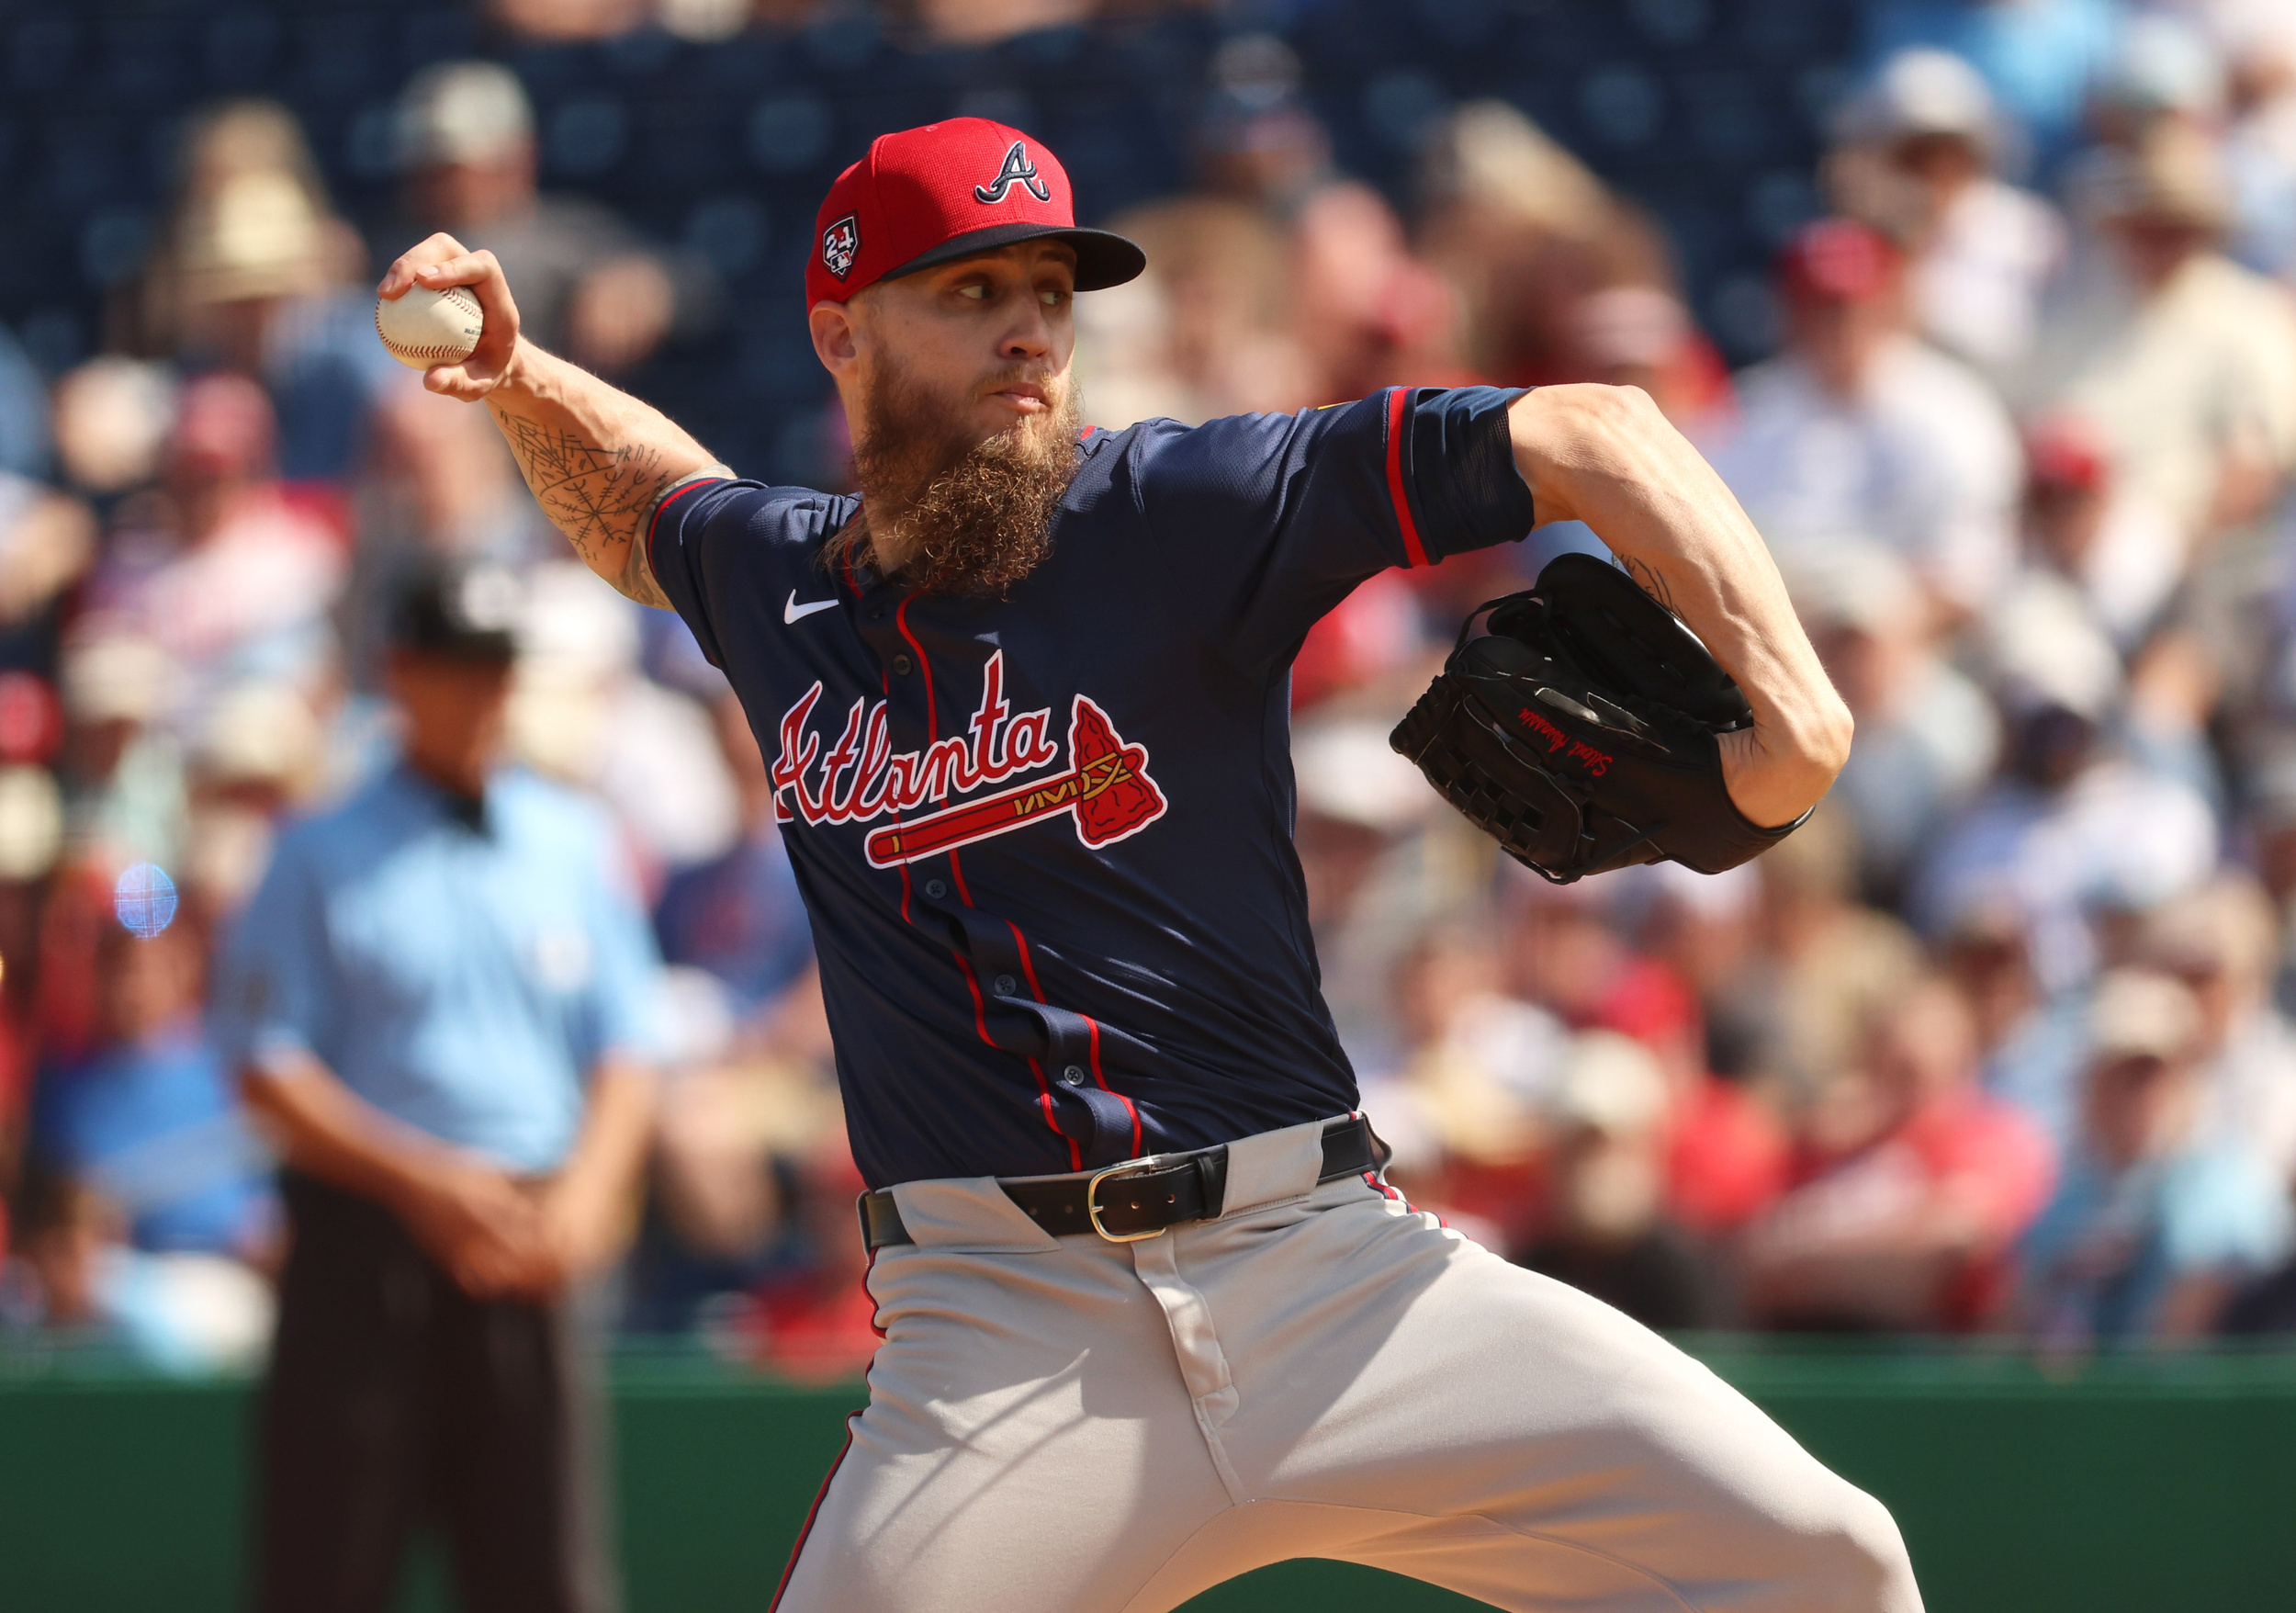 braves reliever makes huge first impression against phillies stars with 'unhittable' pitch